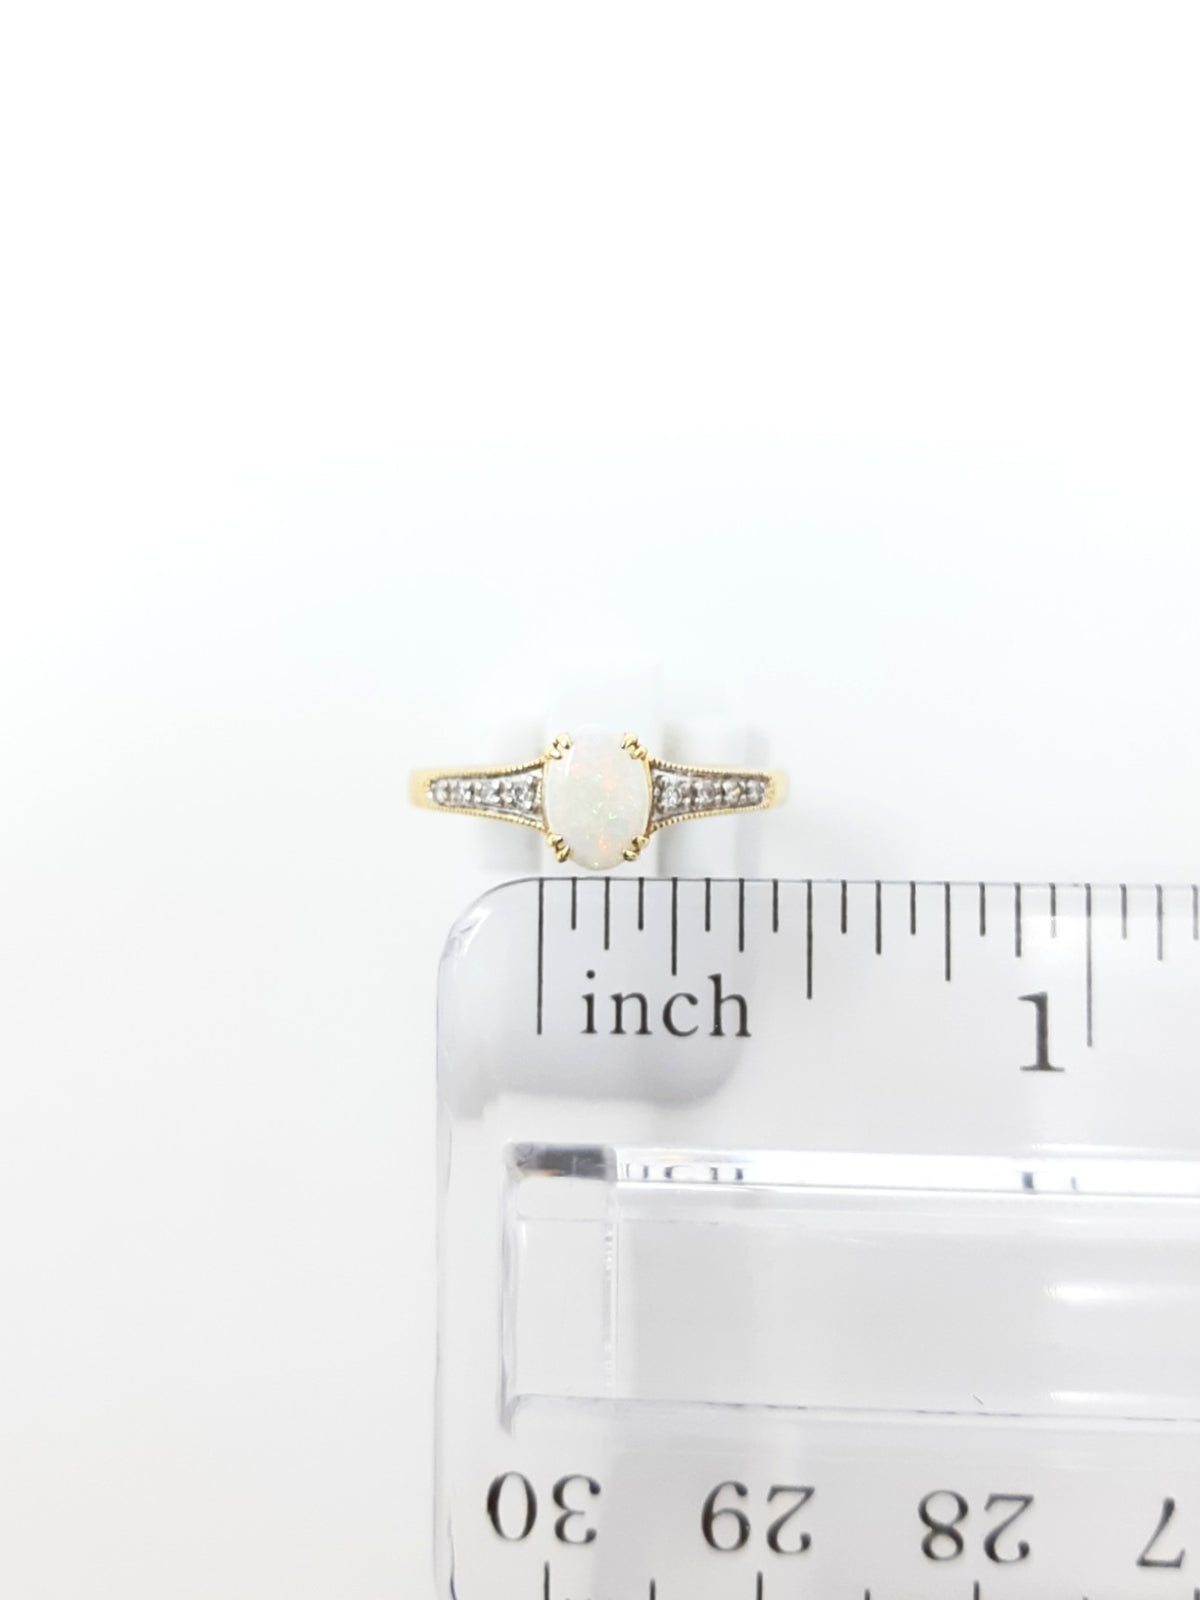 10K Yellow Gold 0.50cttw Genuine Opal and 0.04cttw Diamond Ring, size 7